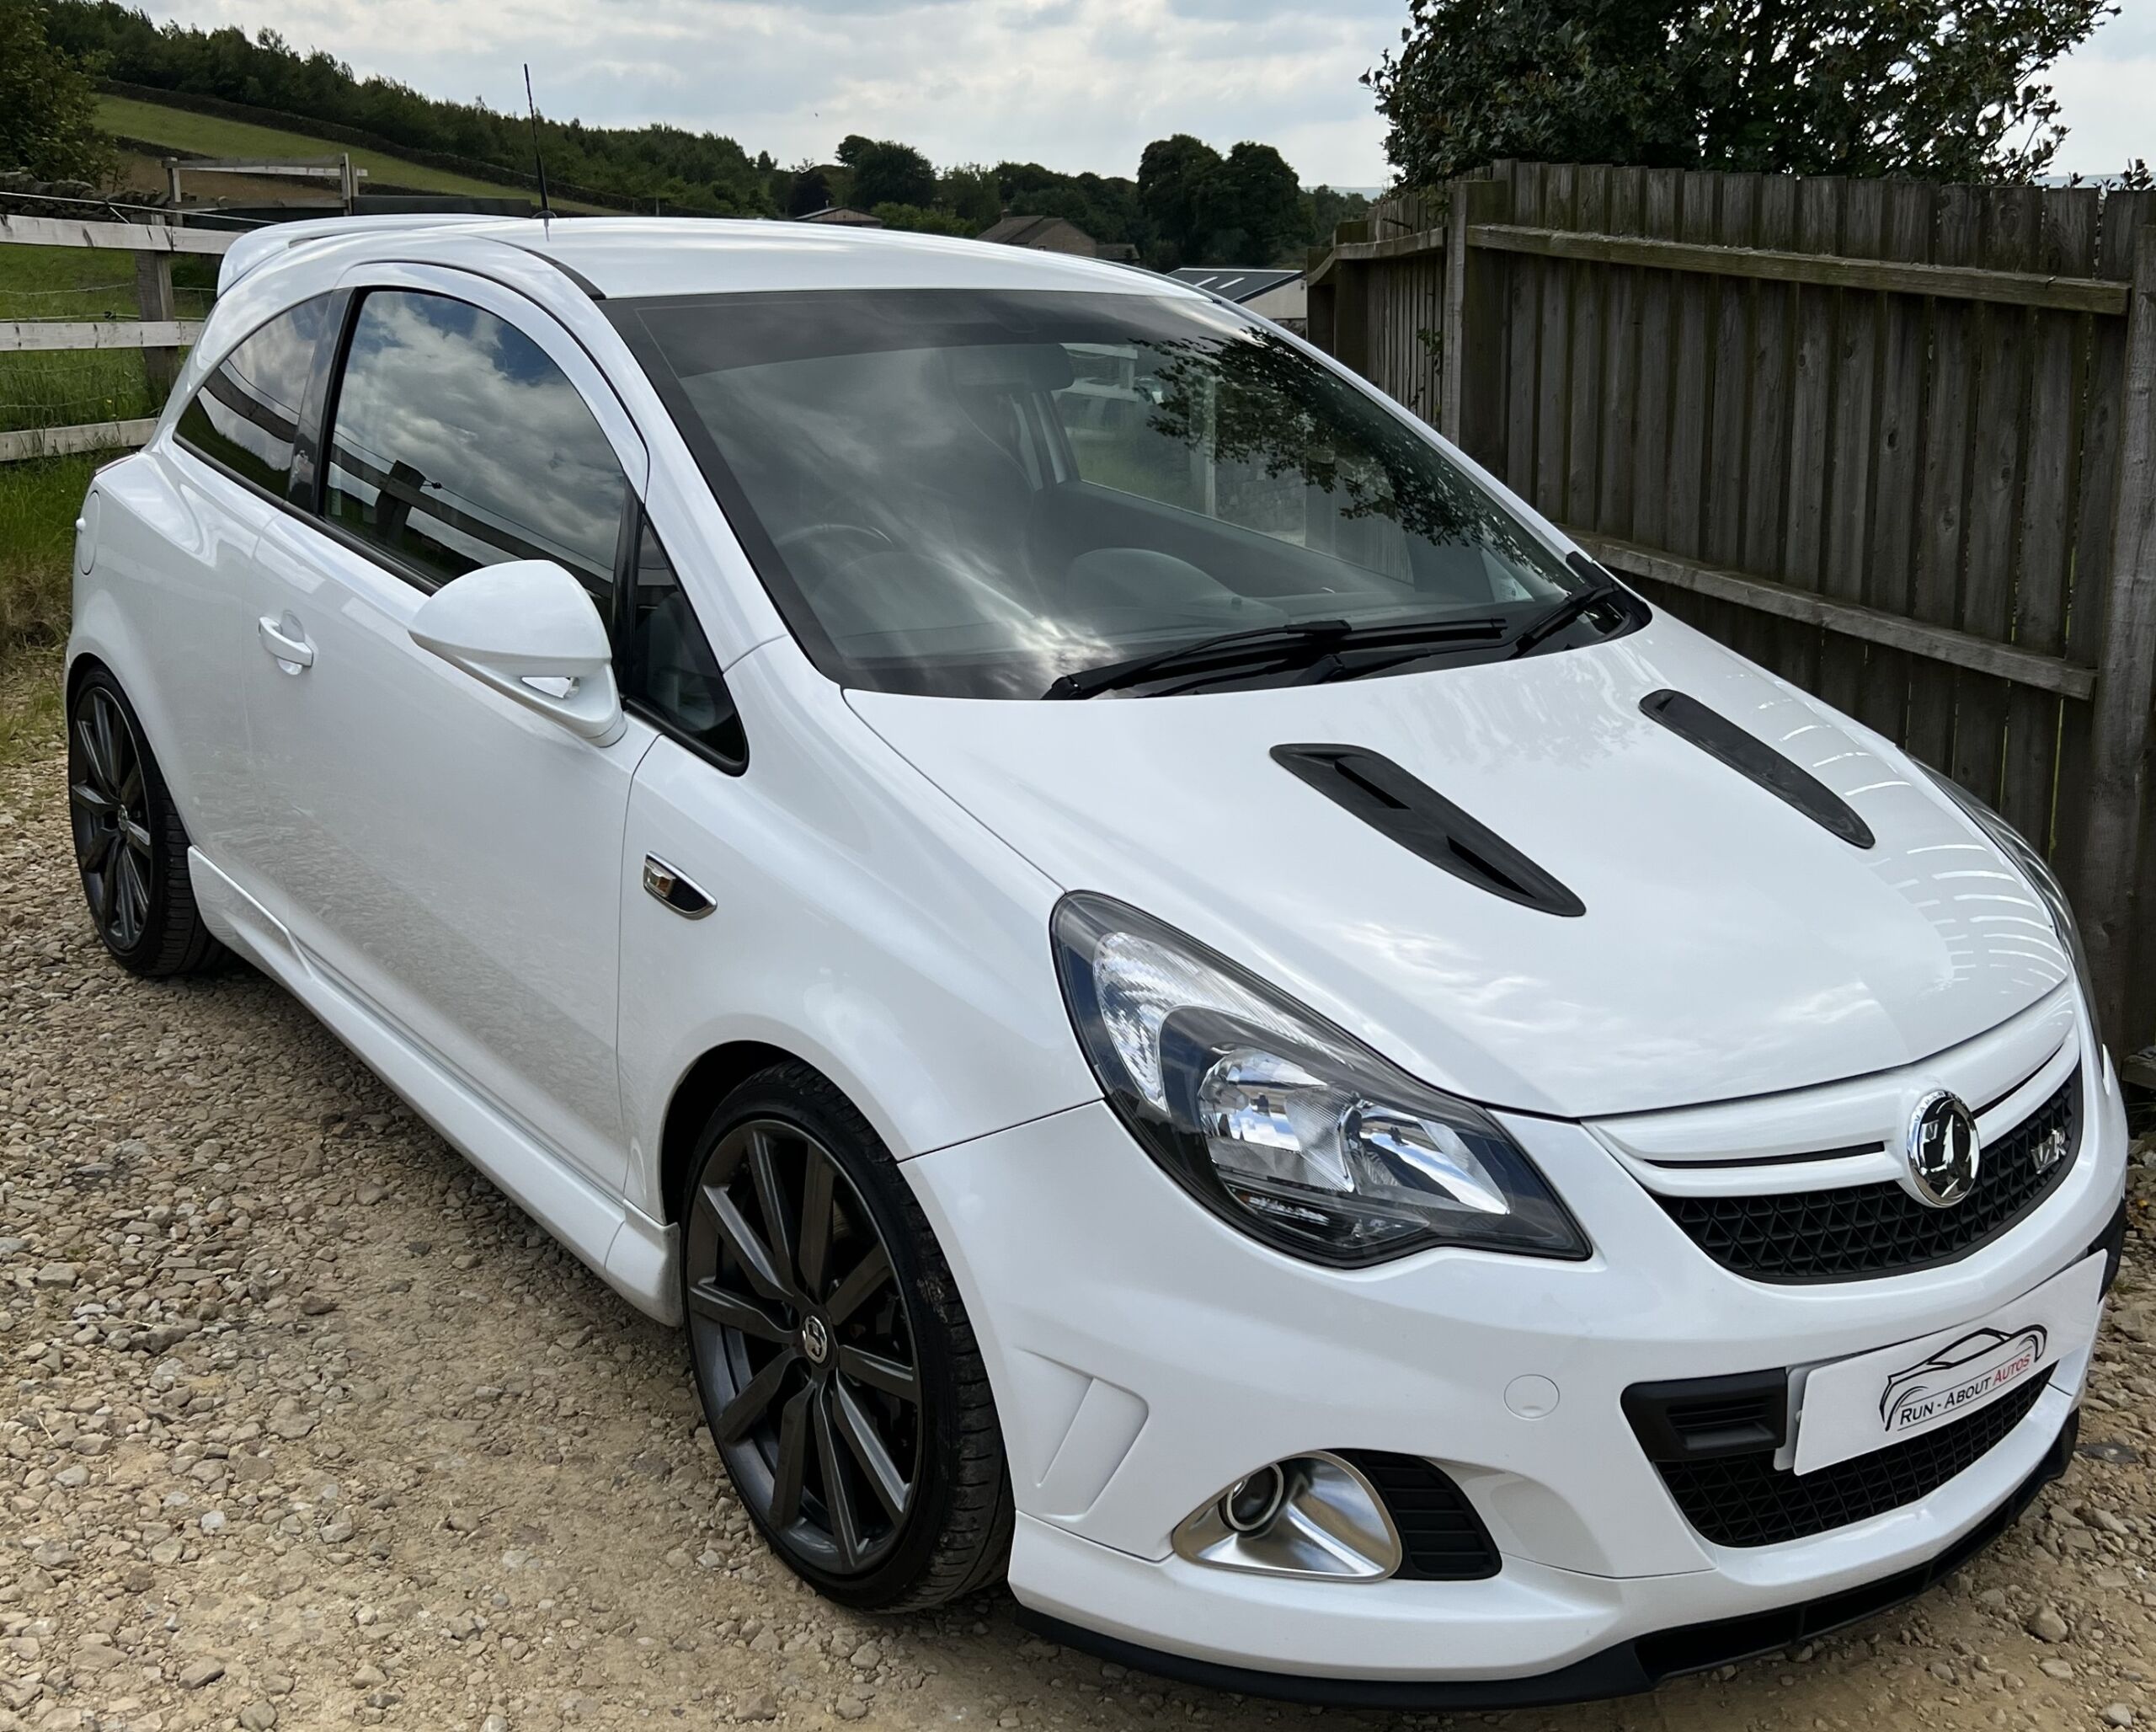 For Sale VAUXHALL CORSA CORSA VXR NURBURGRING EDITION in West Yorkshire